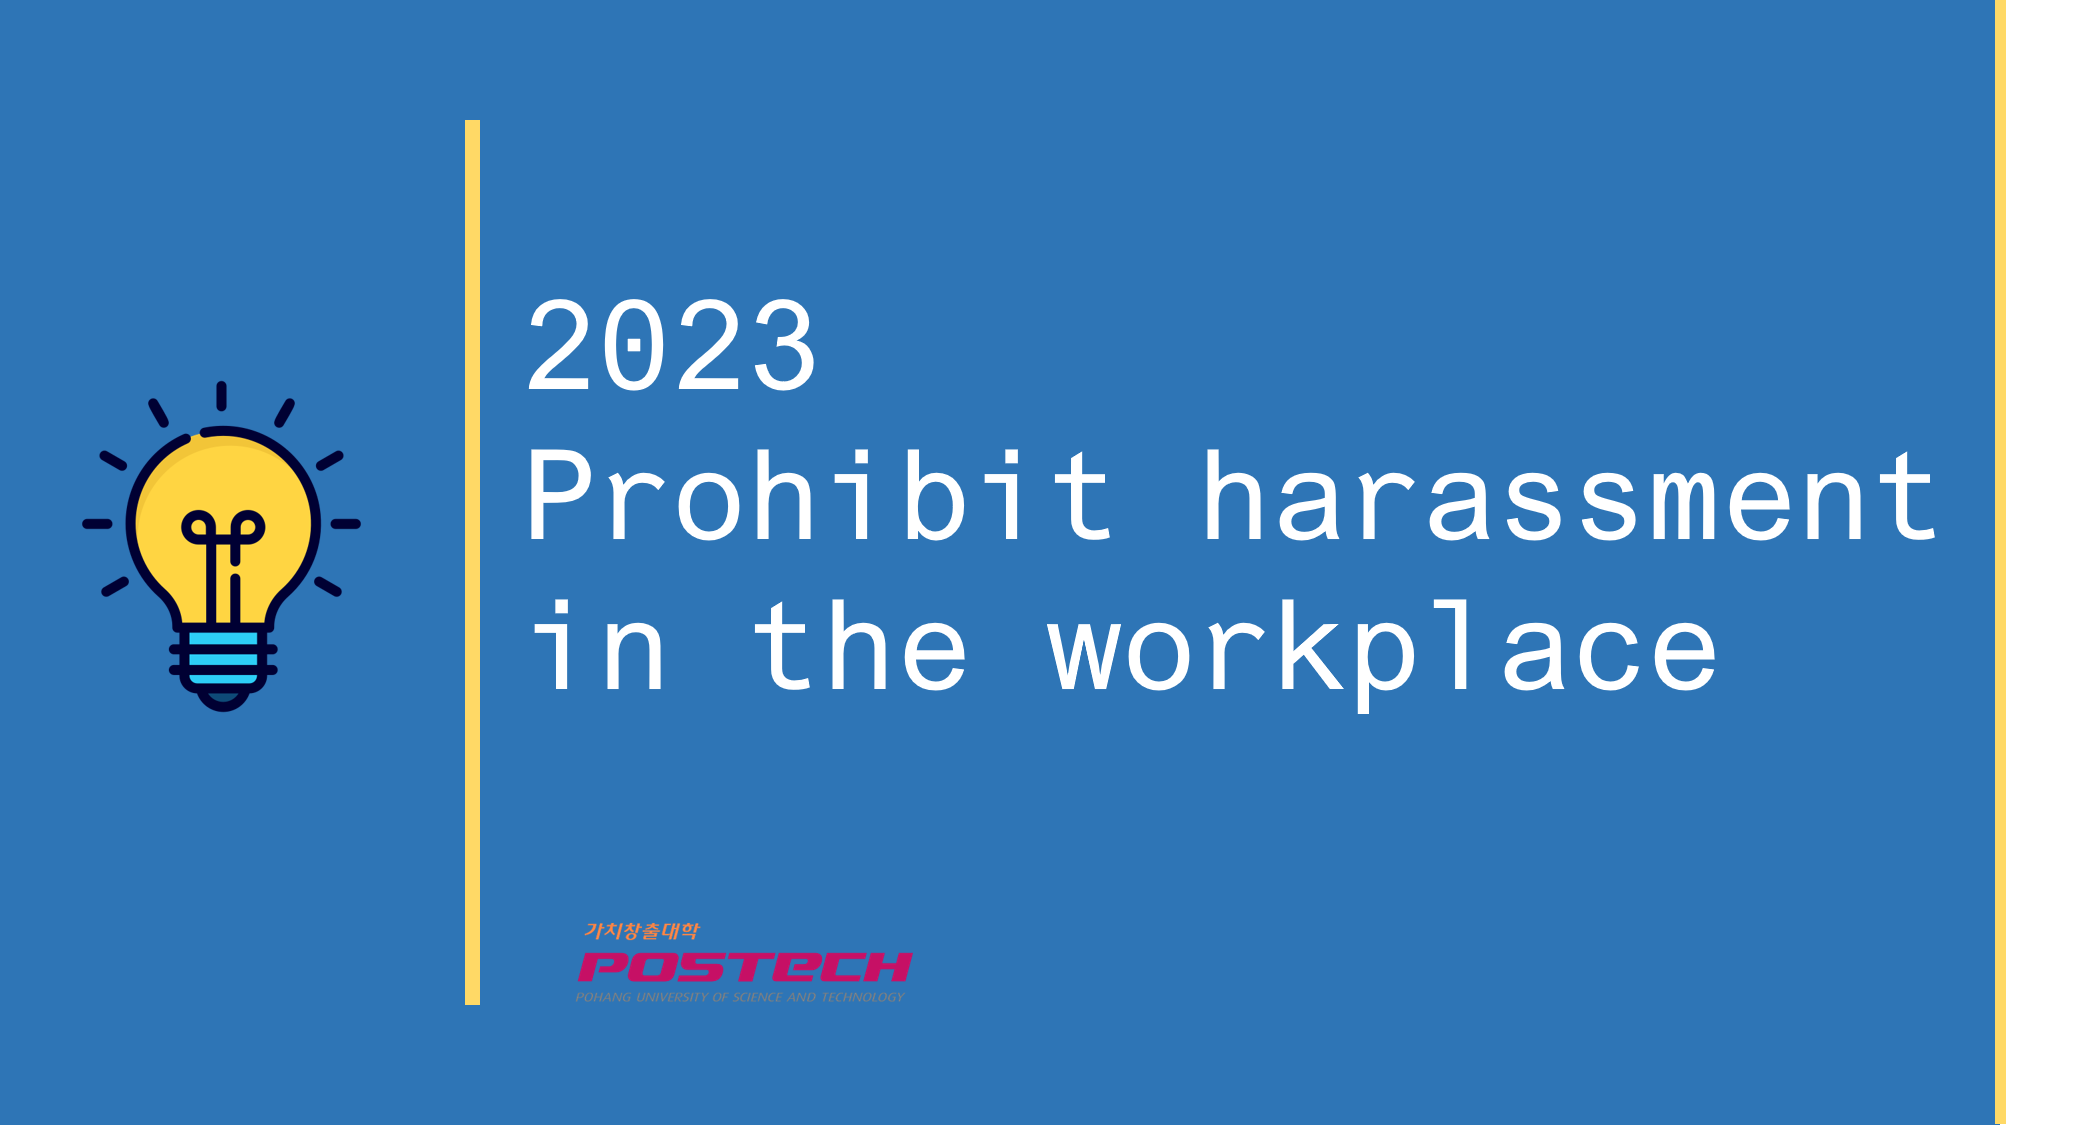 2023 Prohibit harassment in the workplace (2023-4)